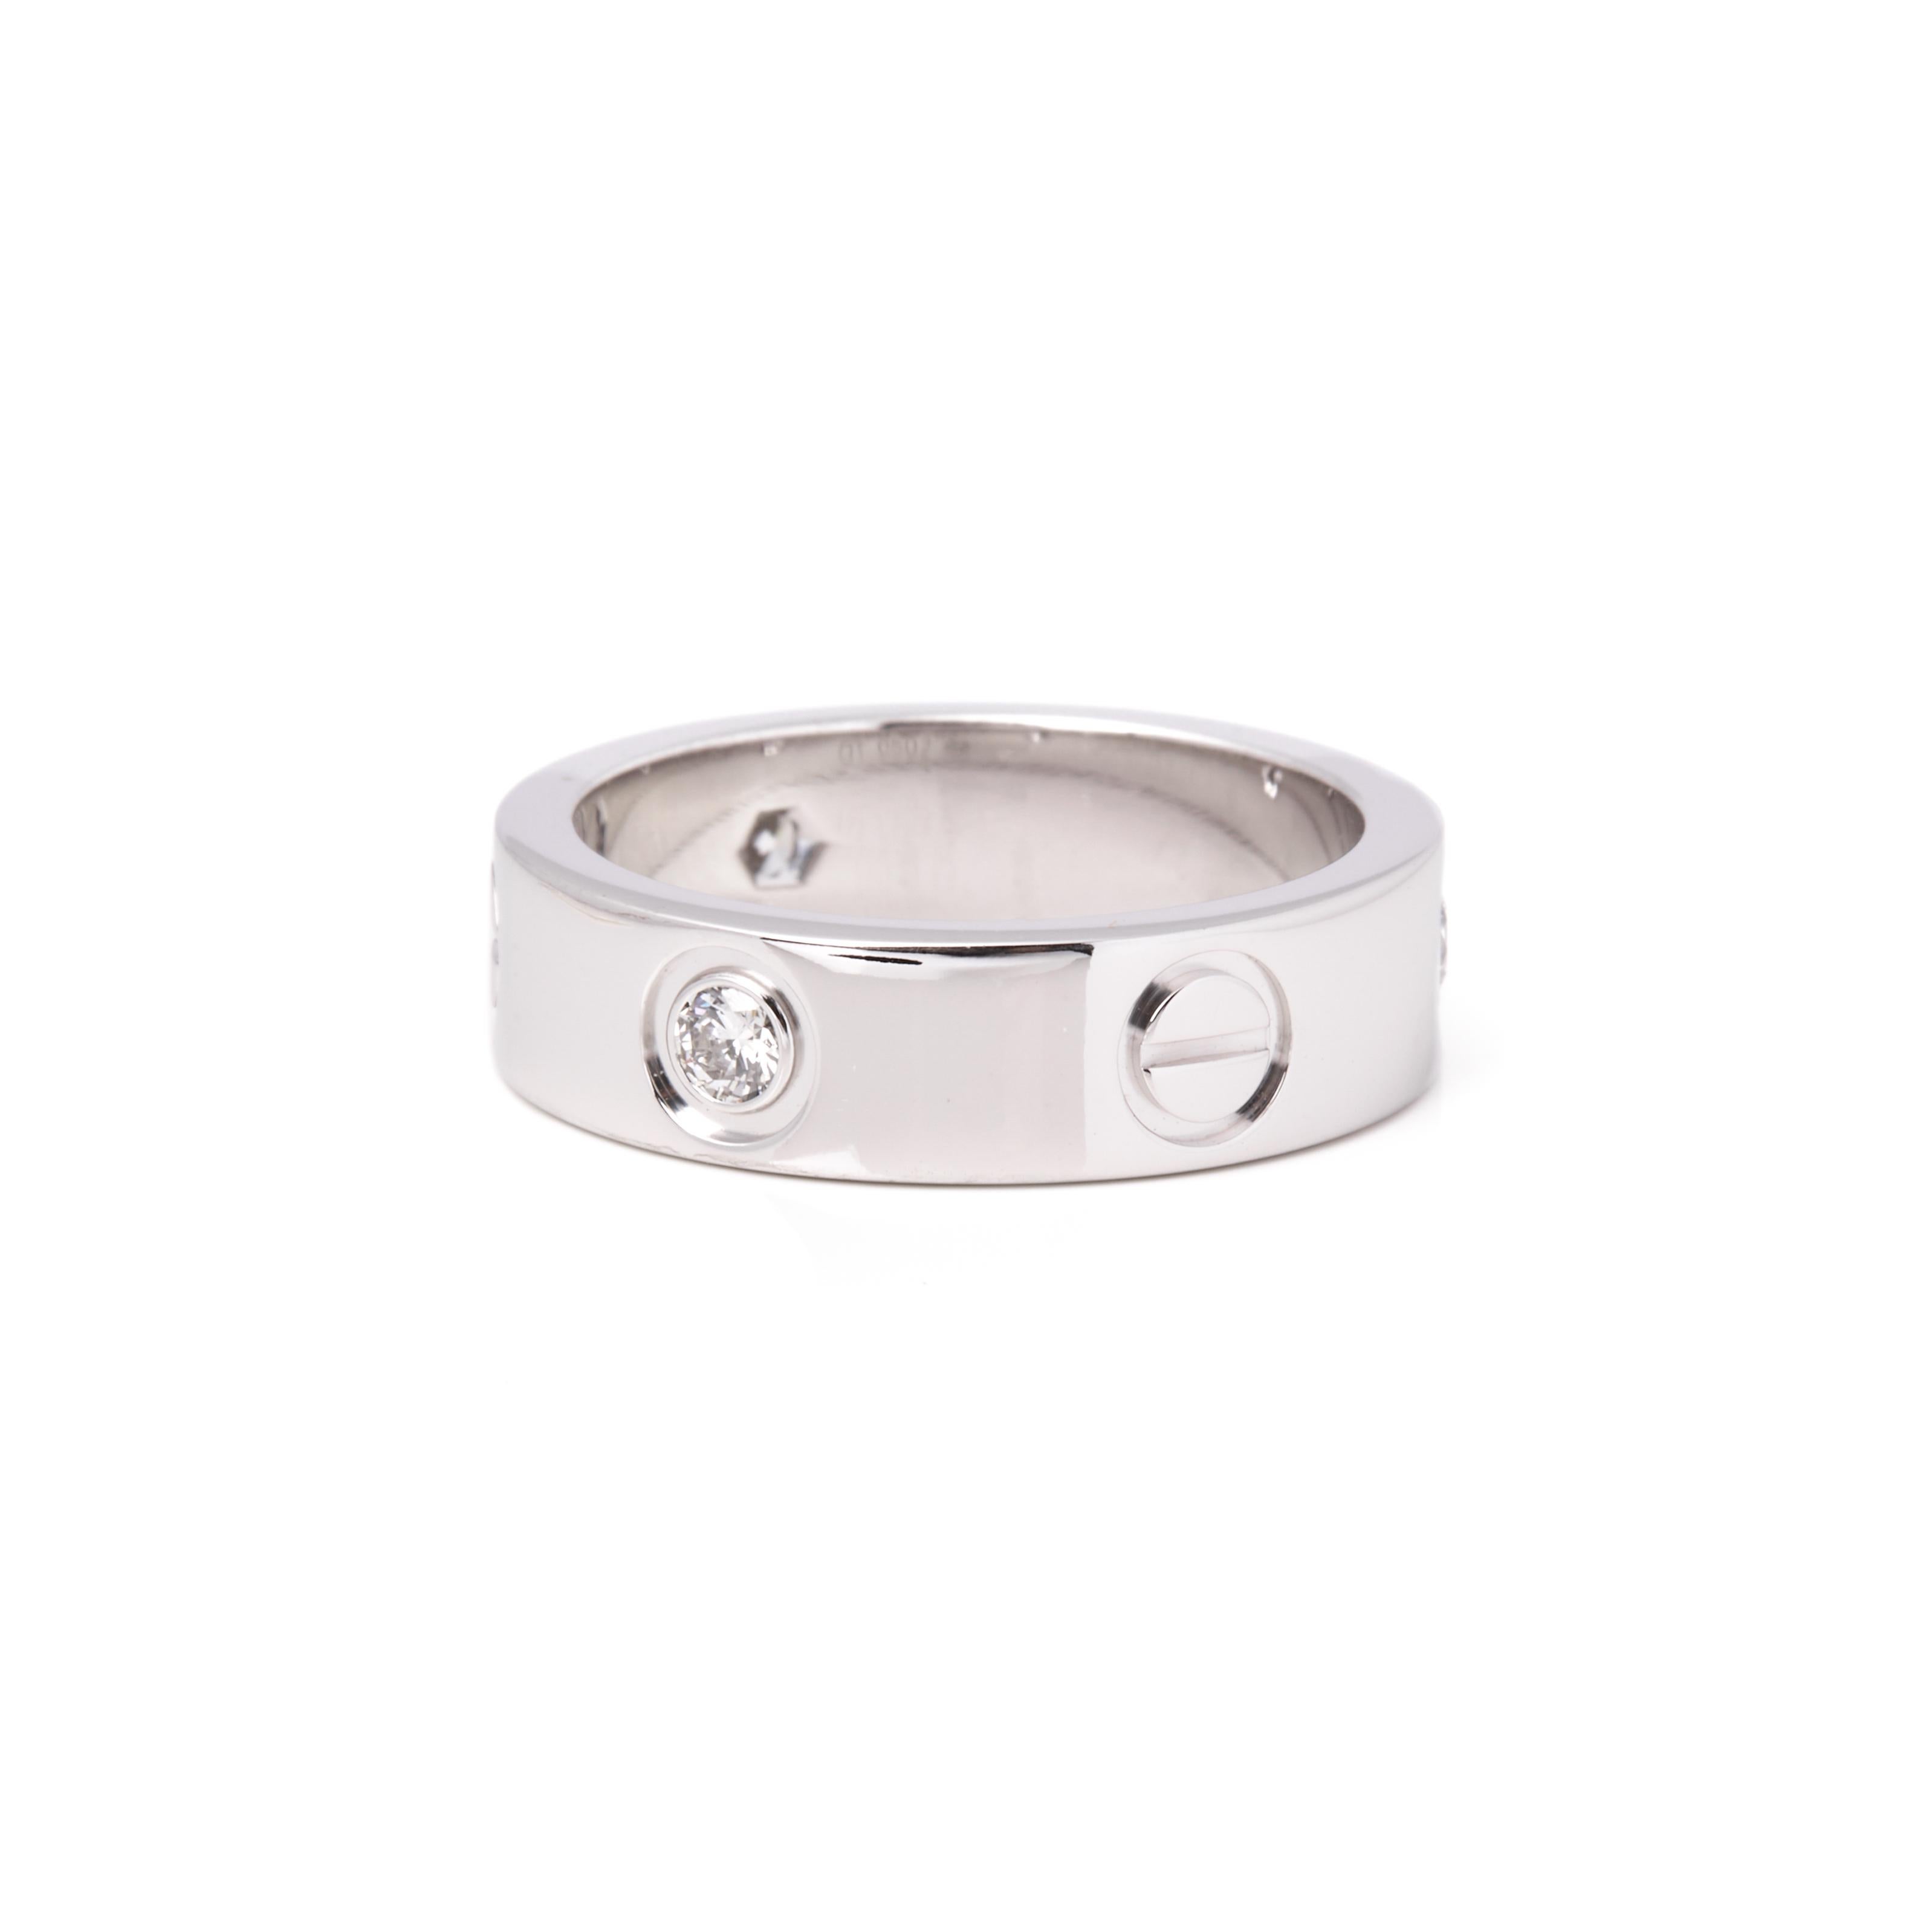 Cartier 3 Diamond 18ct White Gold Love Band Ring

Brand- Cartier
Model- 3 Diamond Love Band Ring
Product Type- Ring
Serial Number- OT****
Accompanied By- Cartier Pouch, Papers
Material(s)- 18ct White Gold
Gemstone- Diamond
UK Ring Size- L 1/2
EU